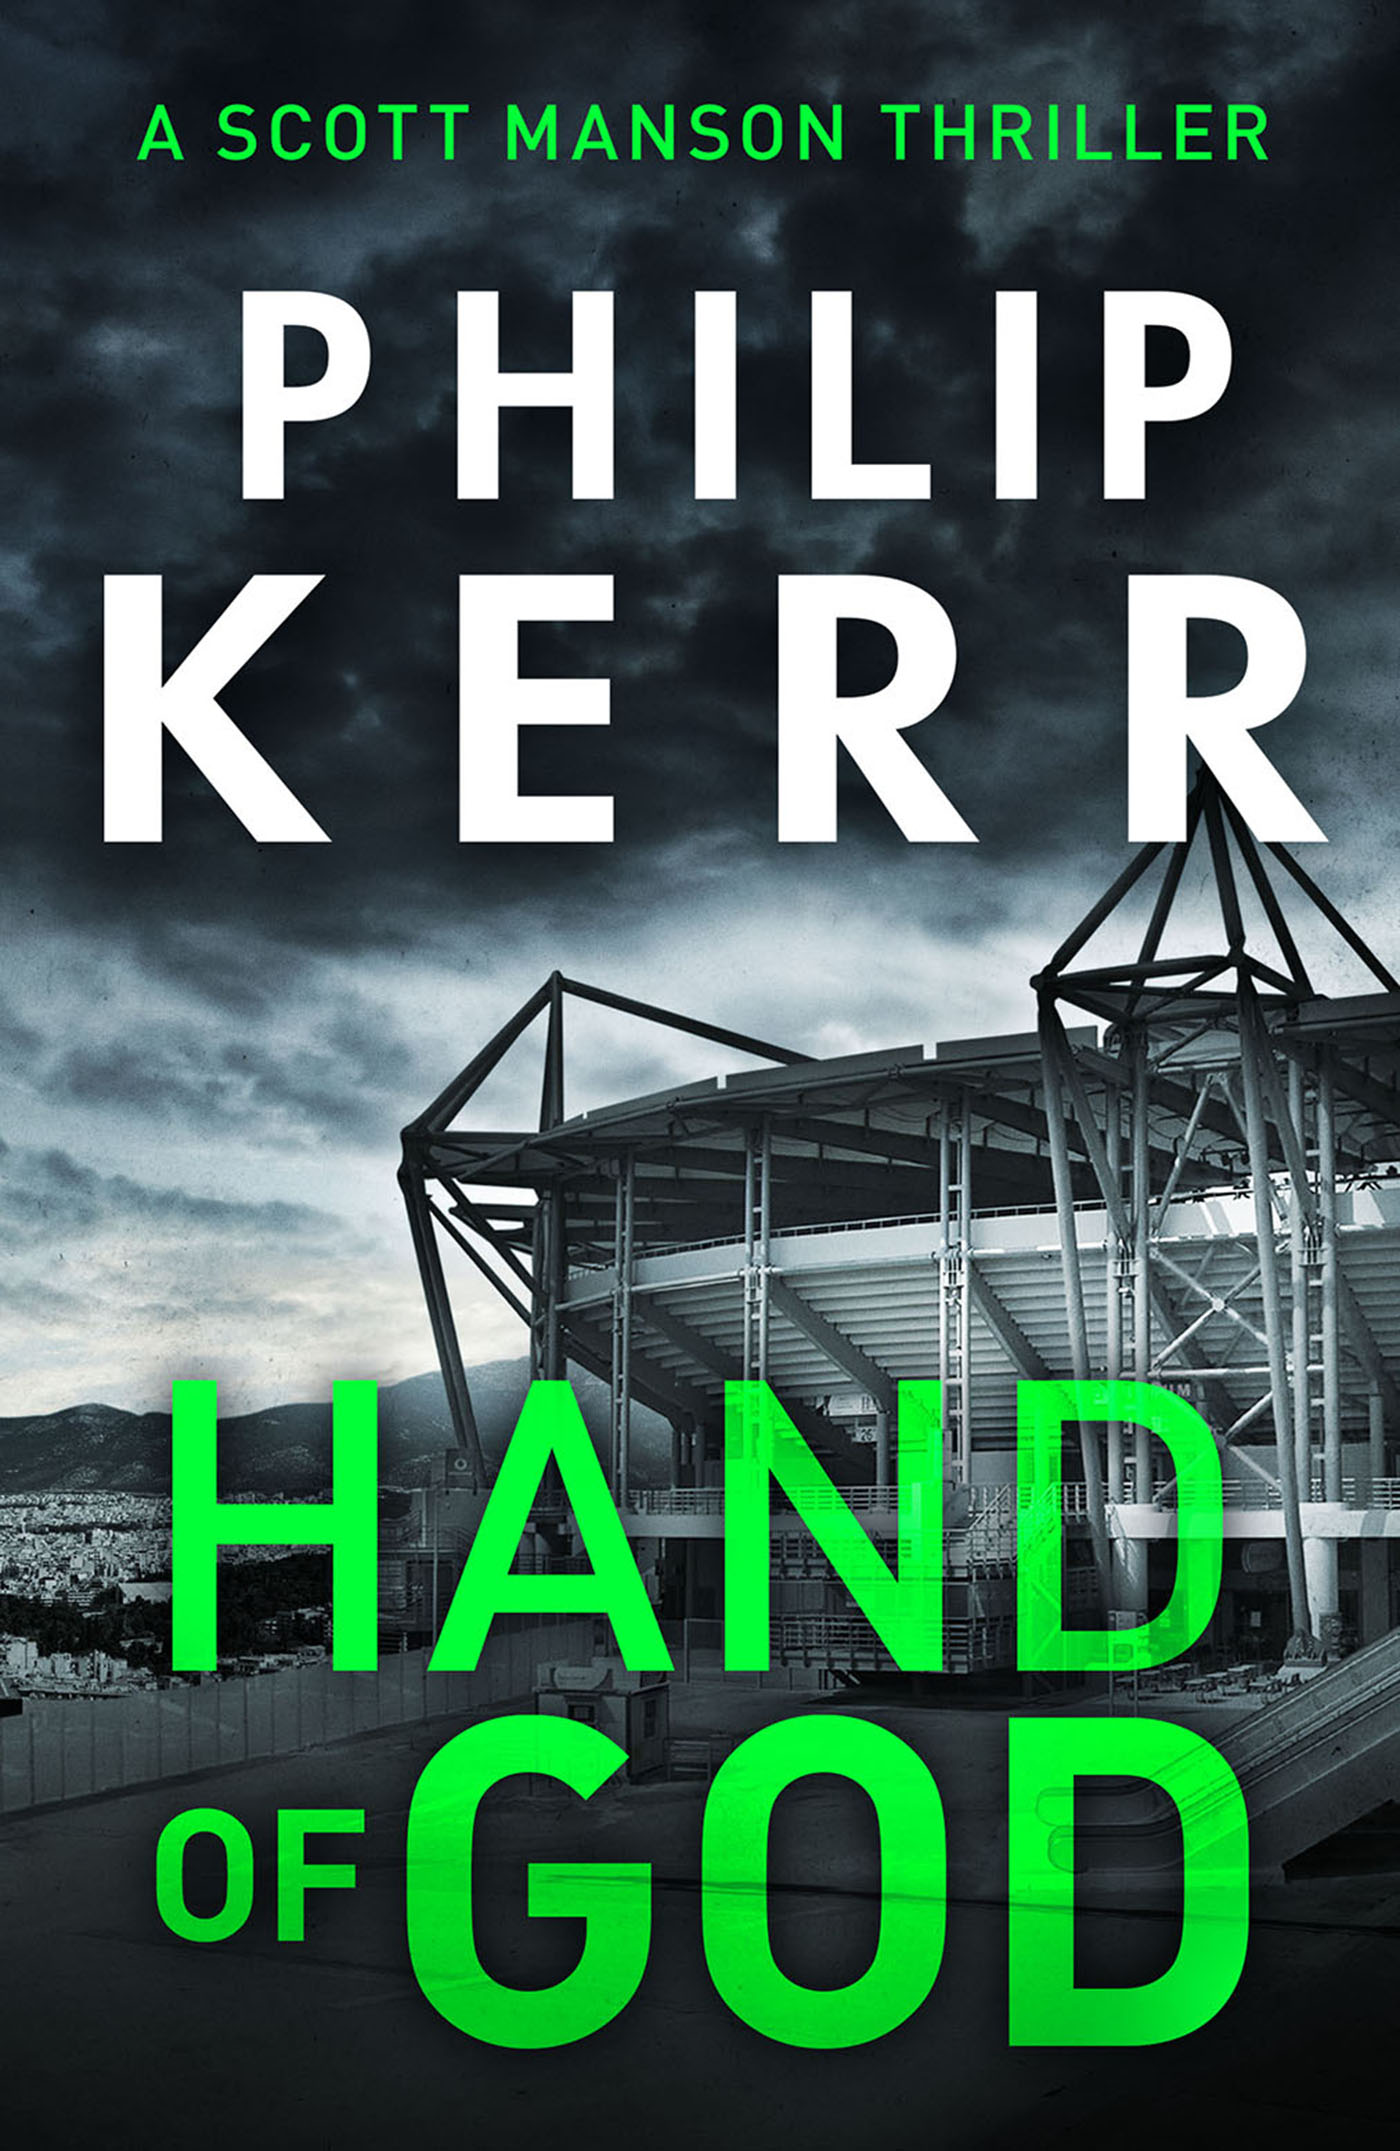 Hand of God by Philip Kerr